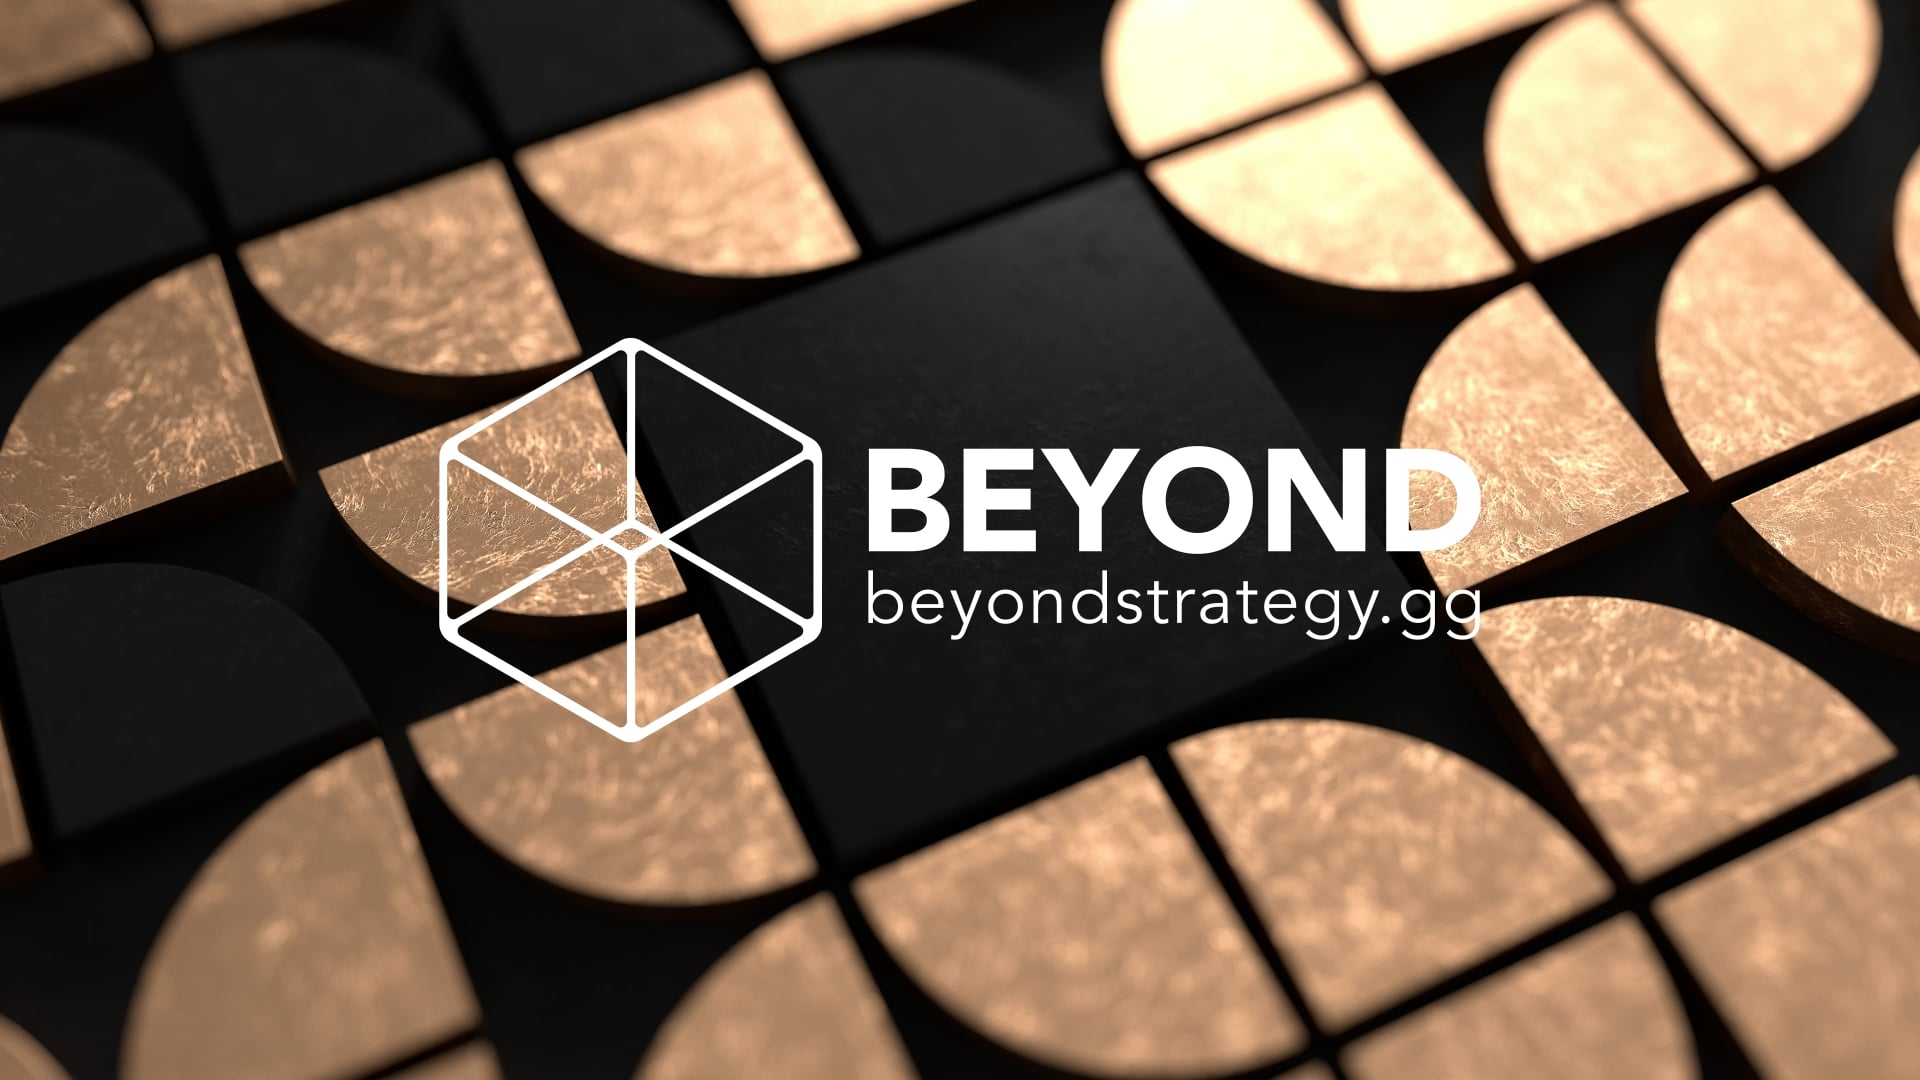 Beyond Strategy -  Logos and background